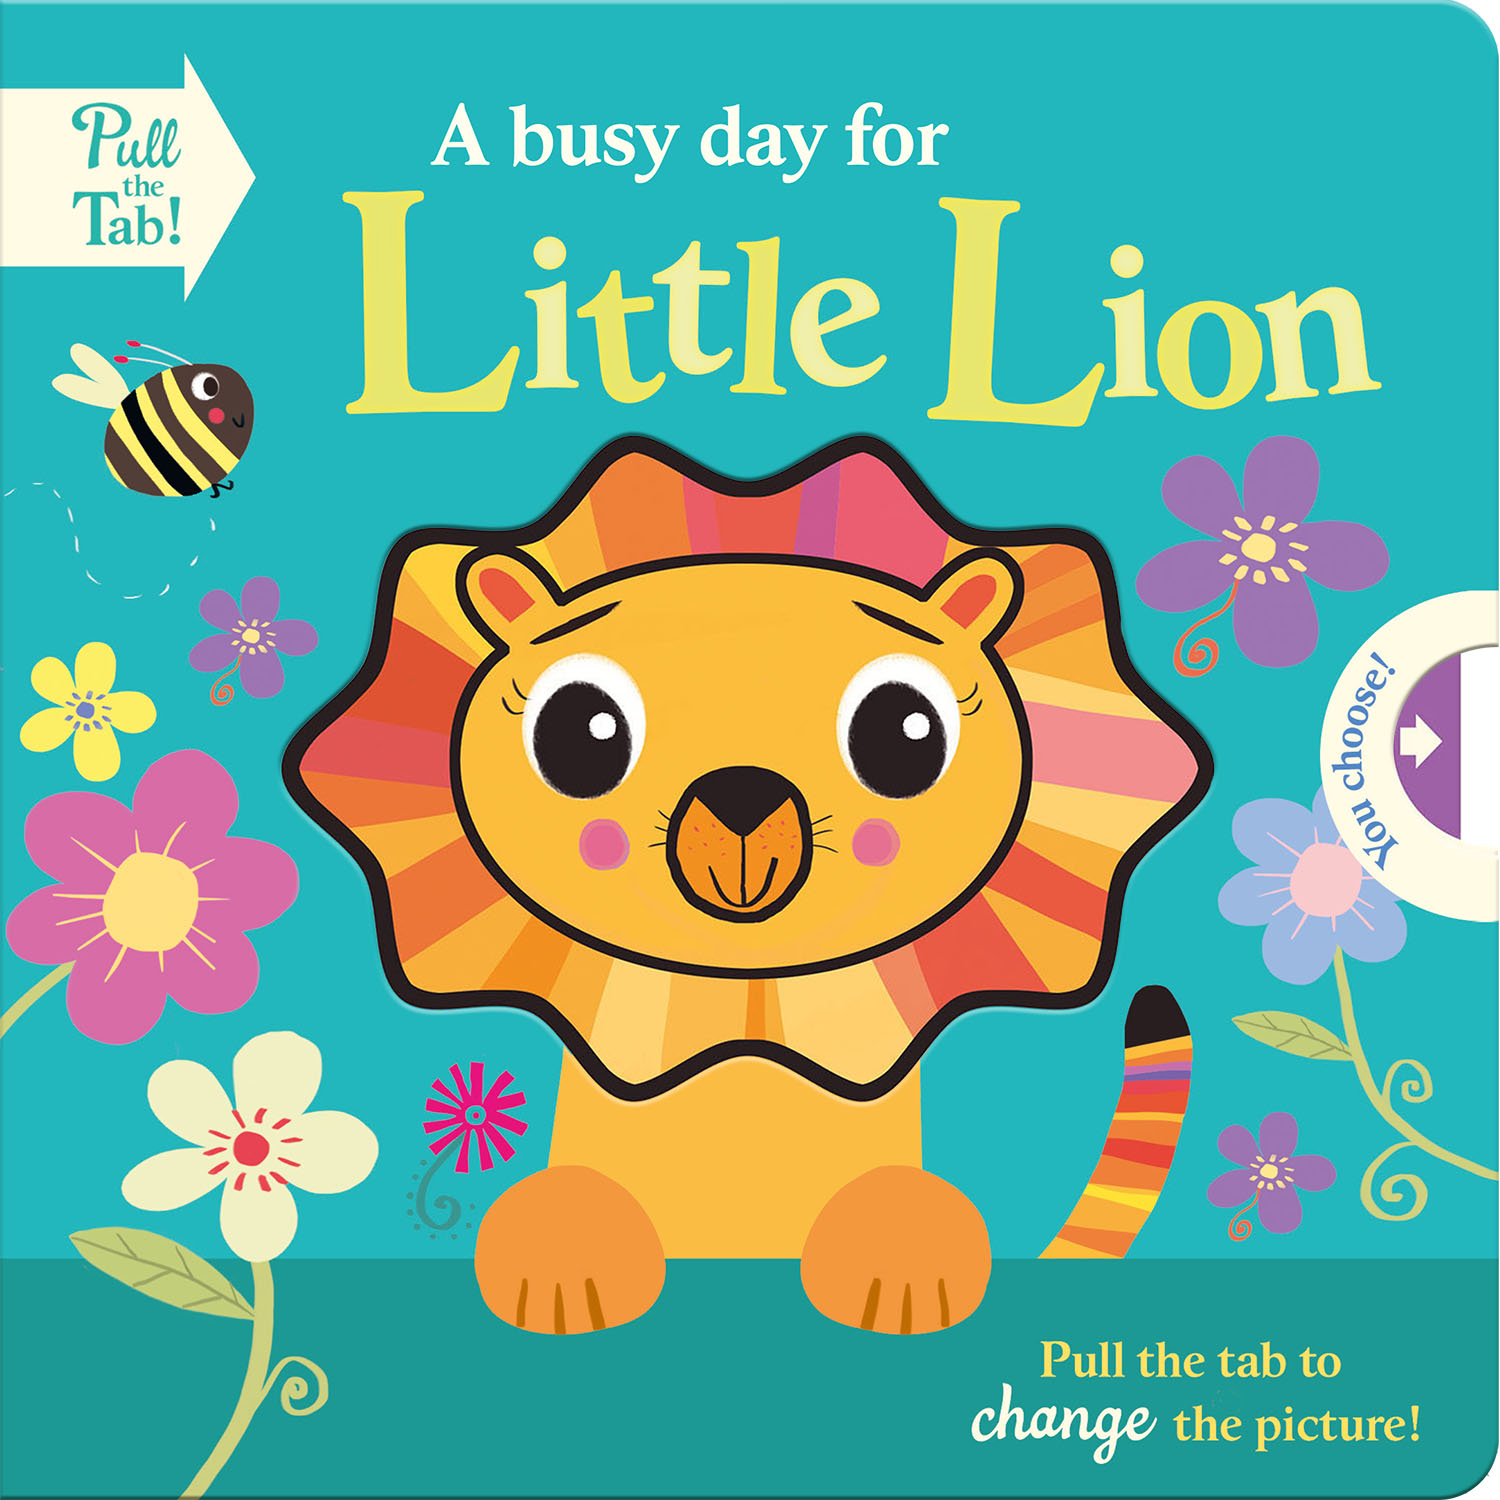 A BUSY DAY FOR LITTLE LION